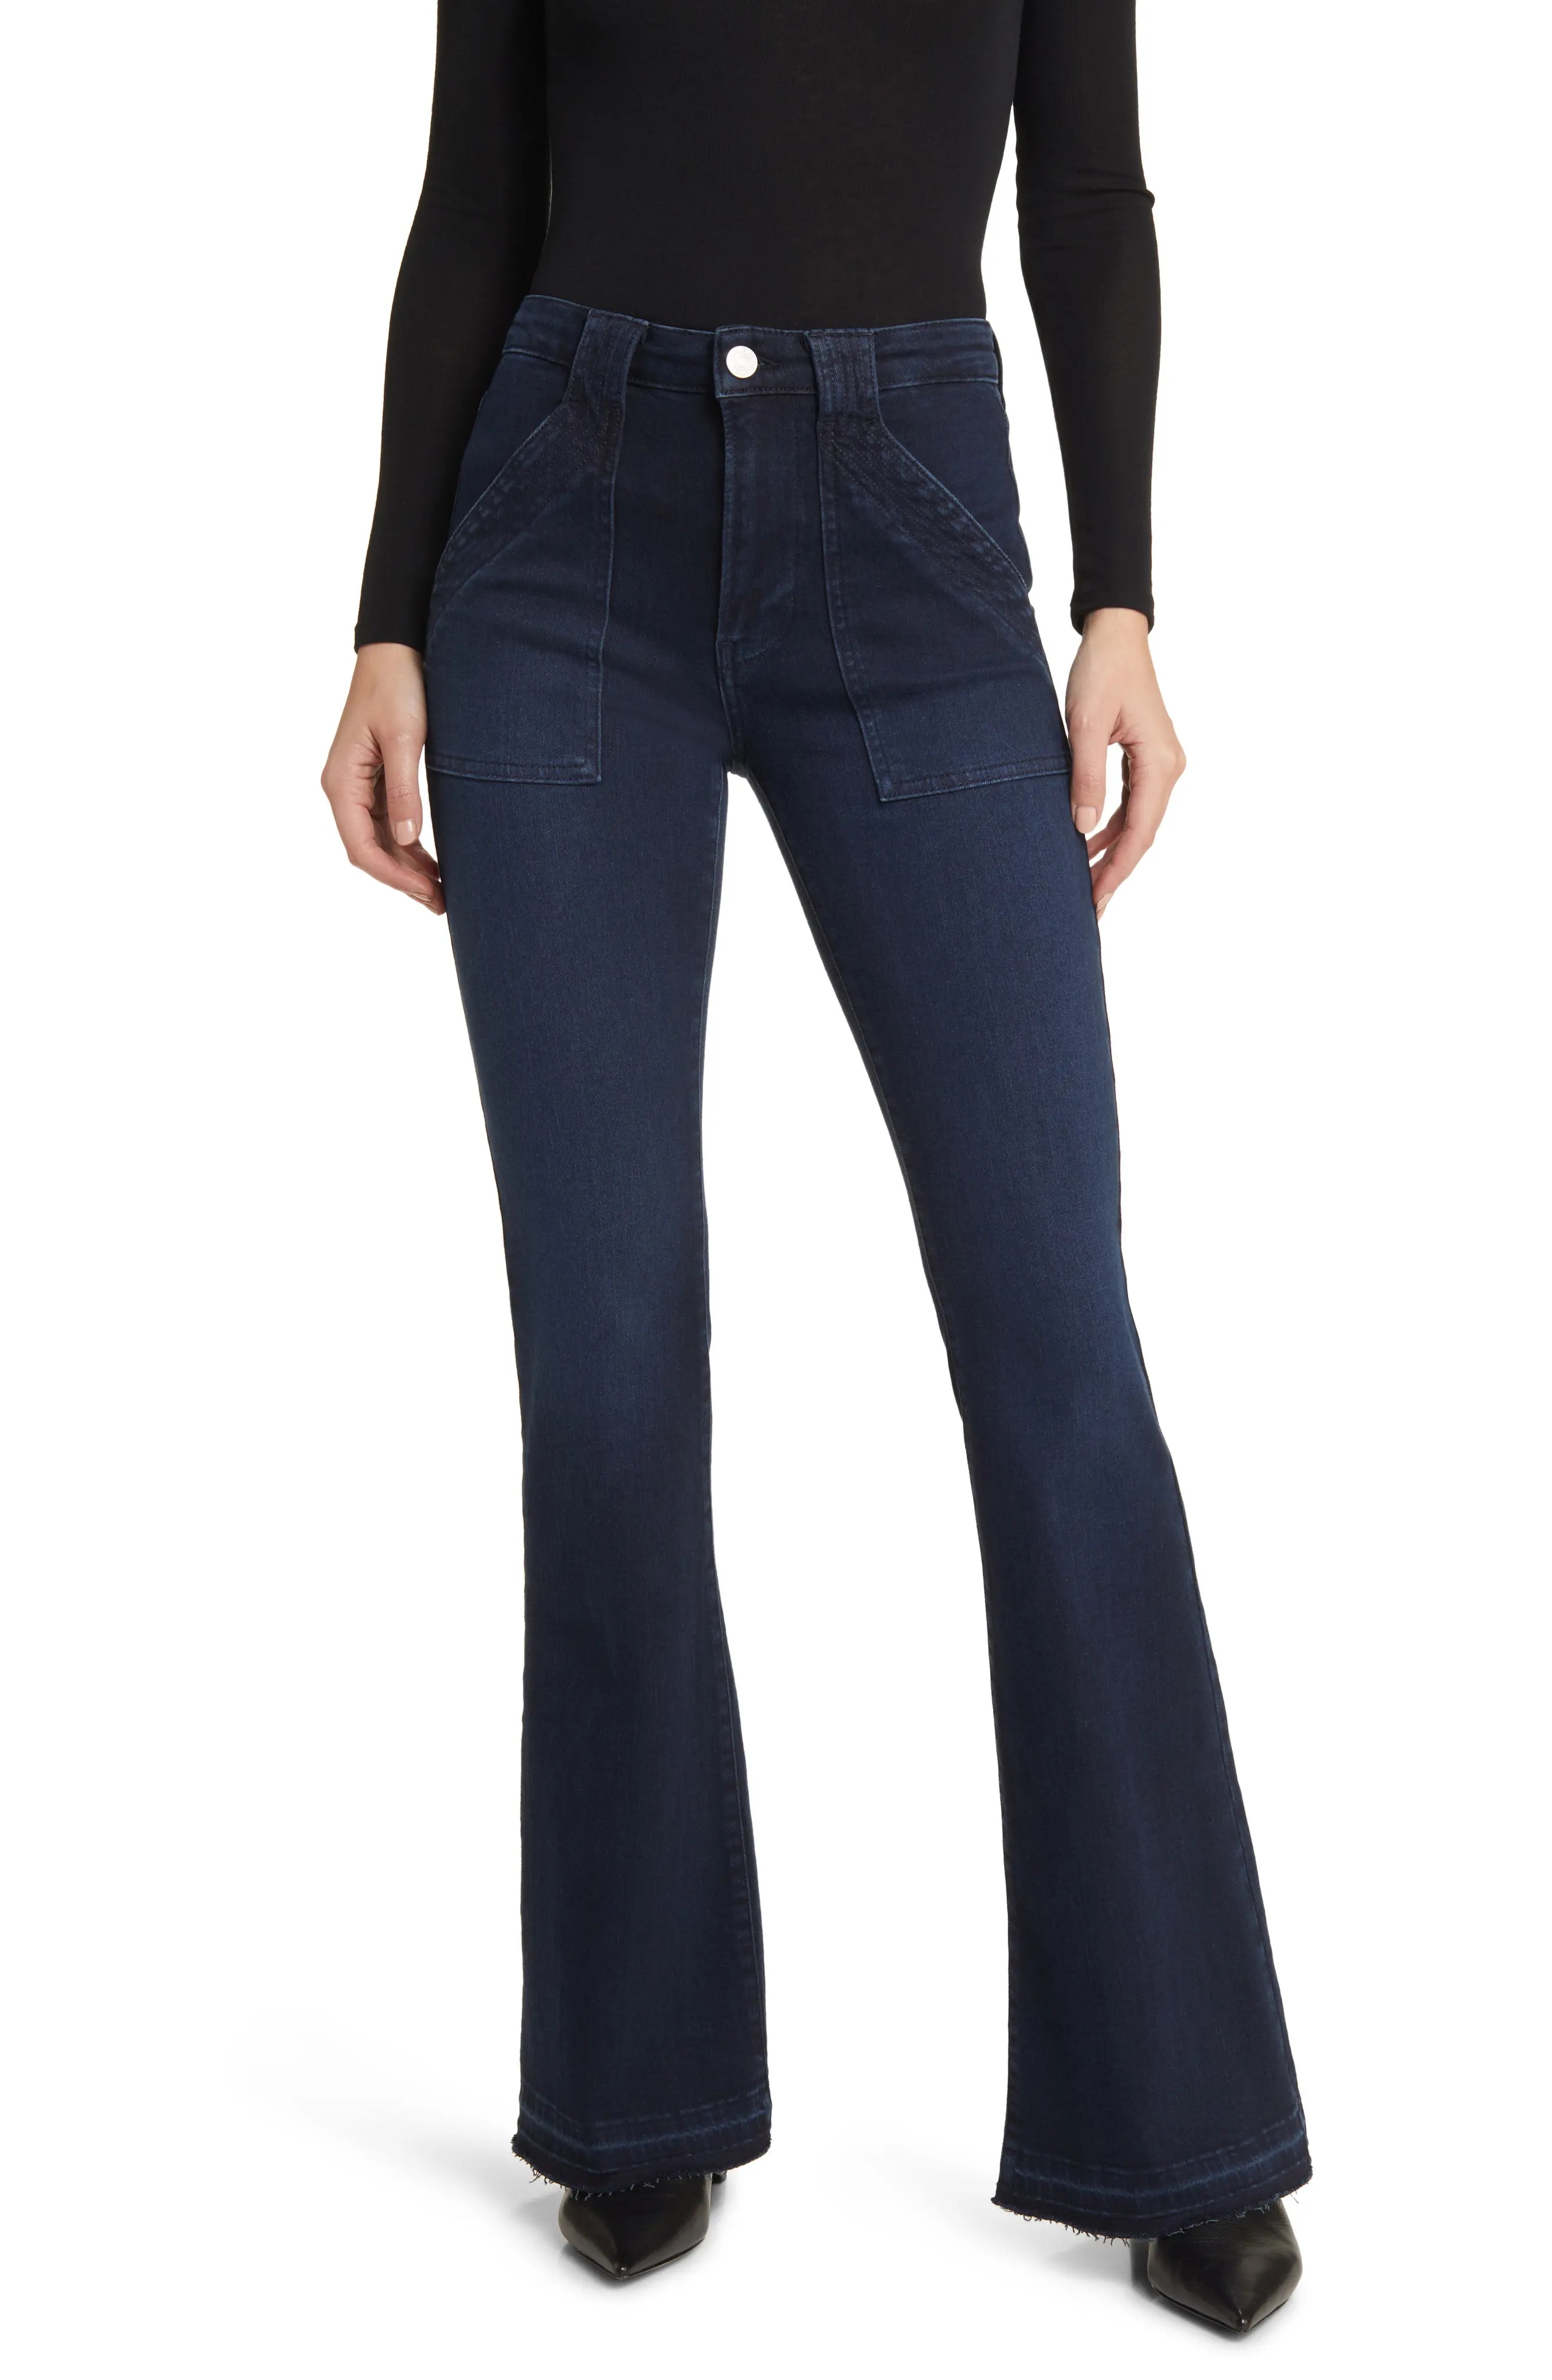 Trapunto St. Le High Flare Jeans - 1